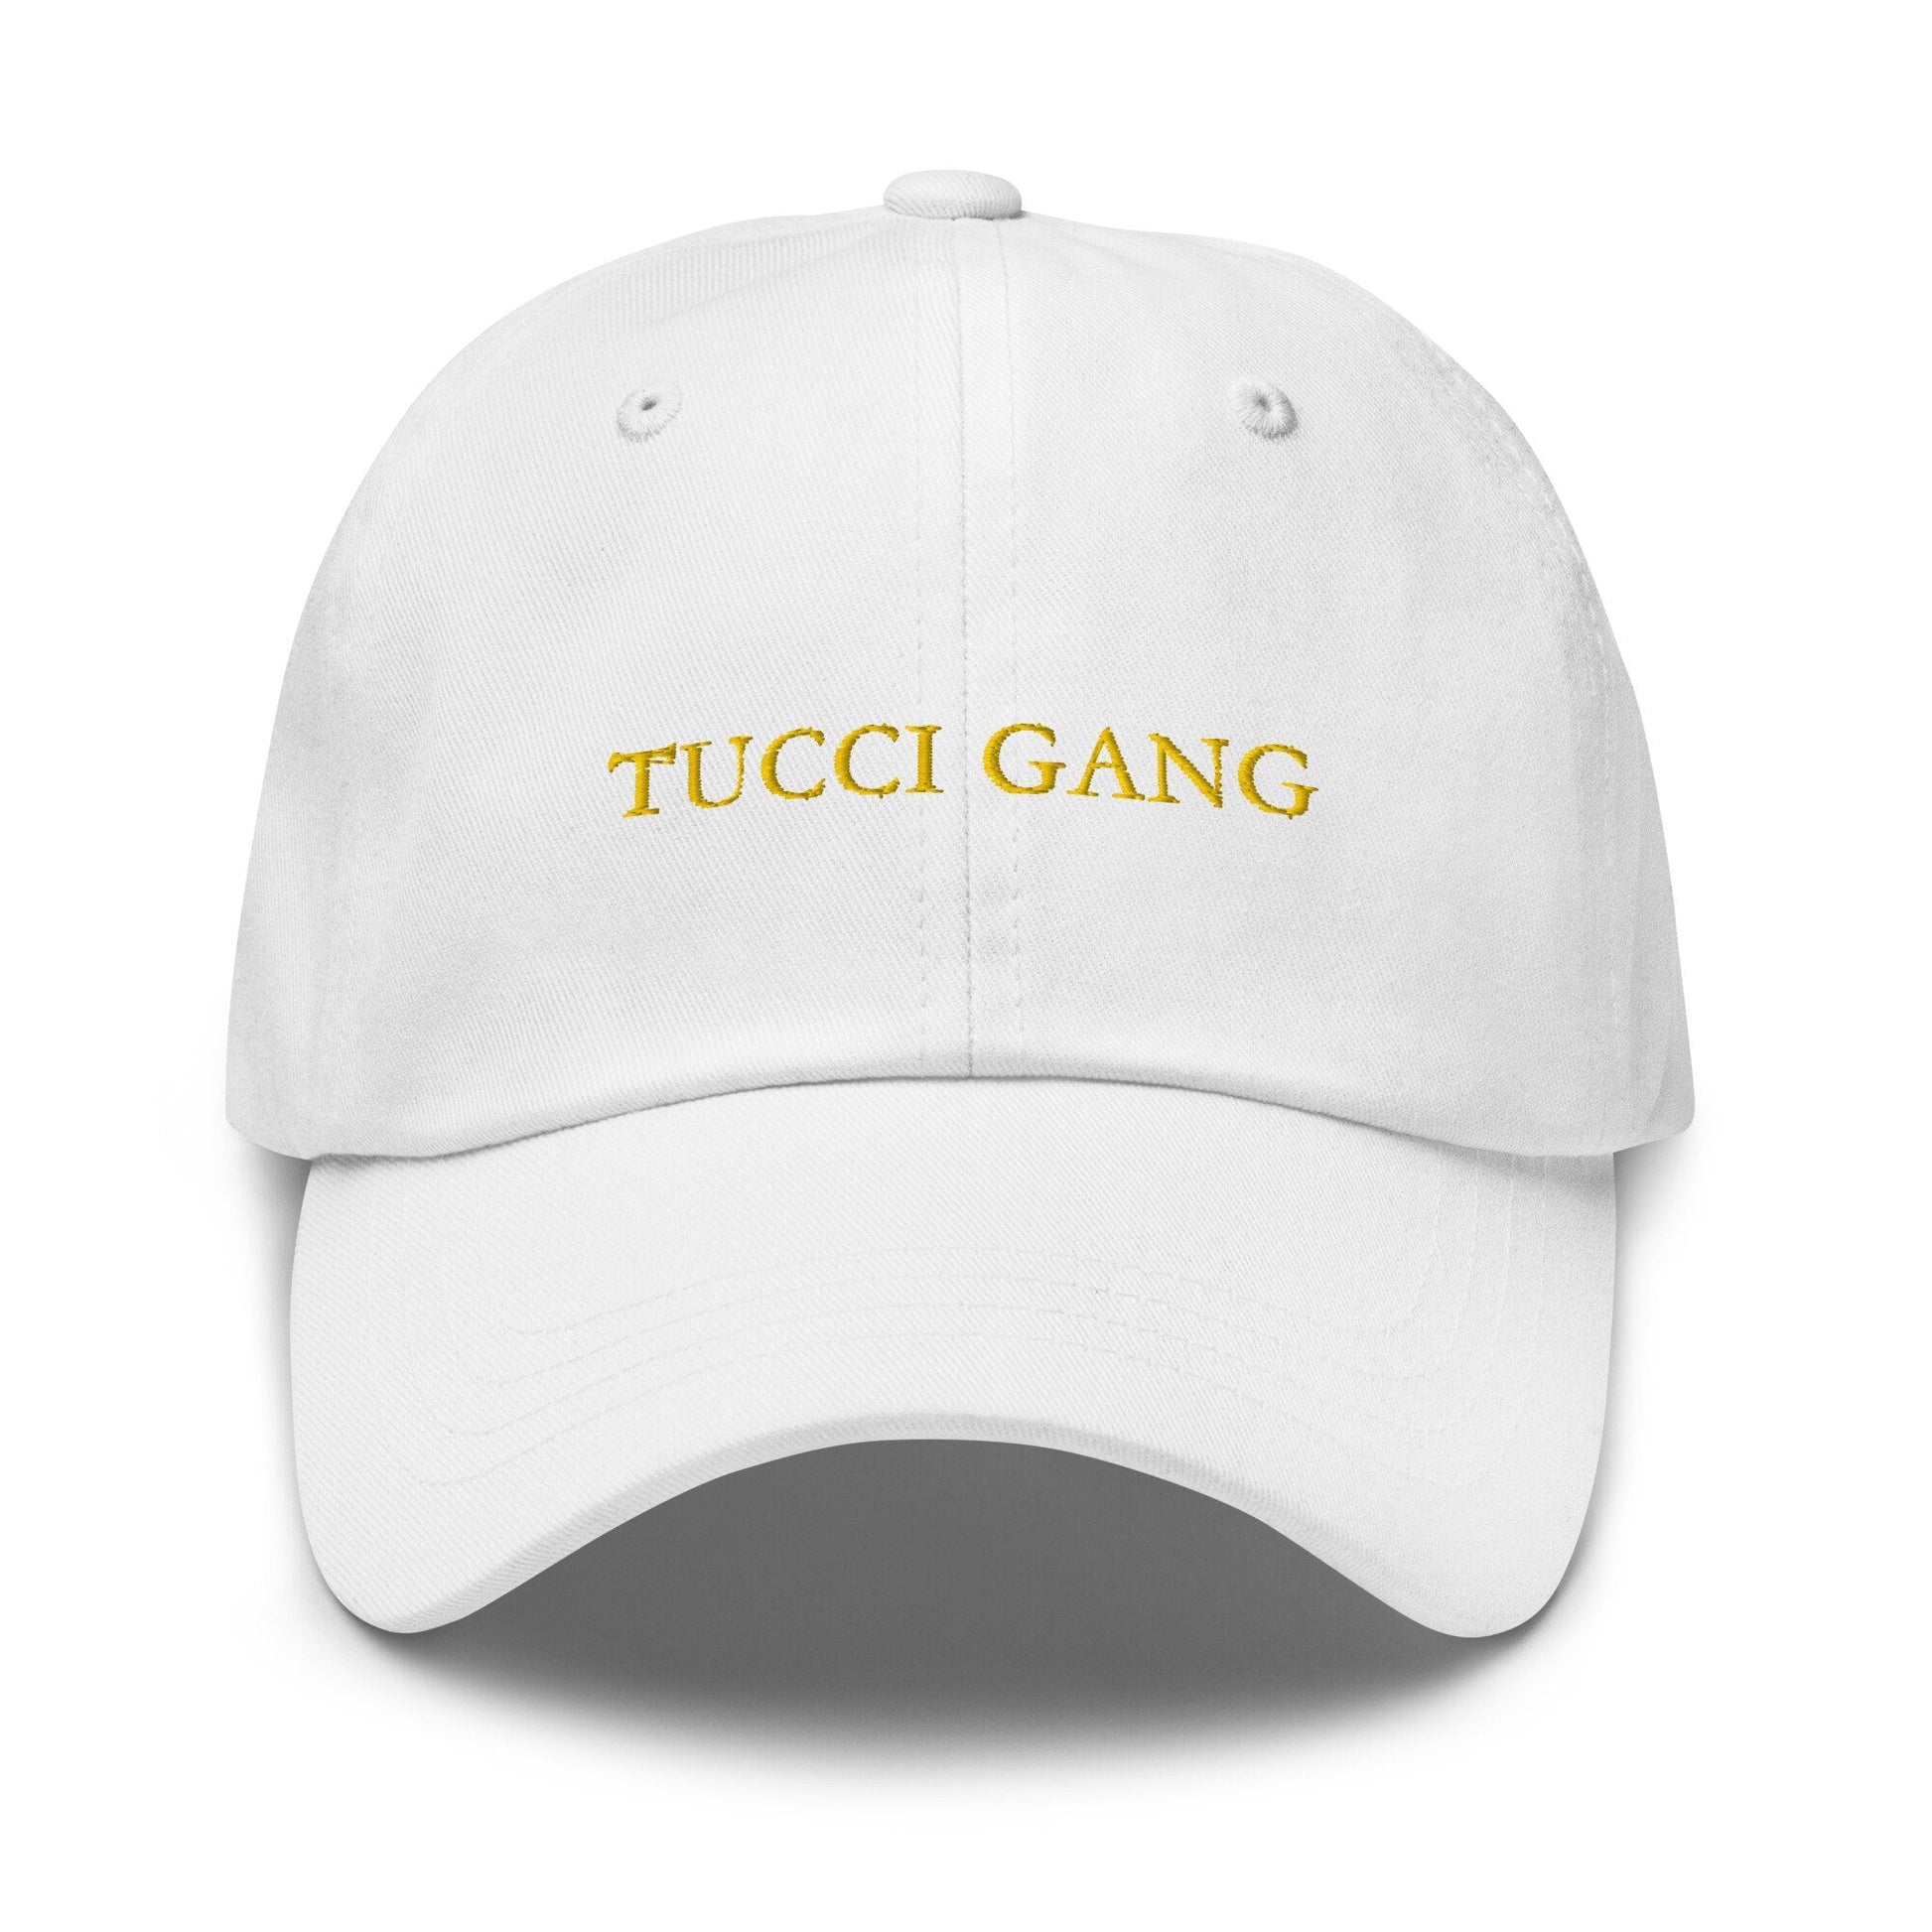 Stanley Tucci Hat - Tucci Gang - Minimalist Embroidered Cotton Cap - Evilwater Originals